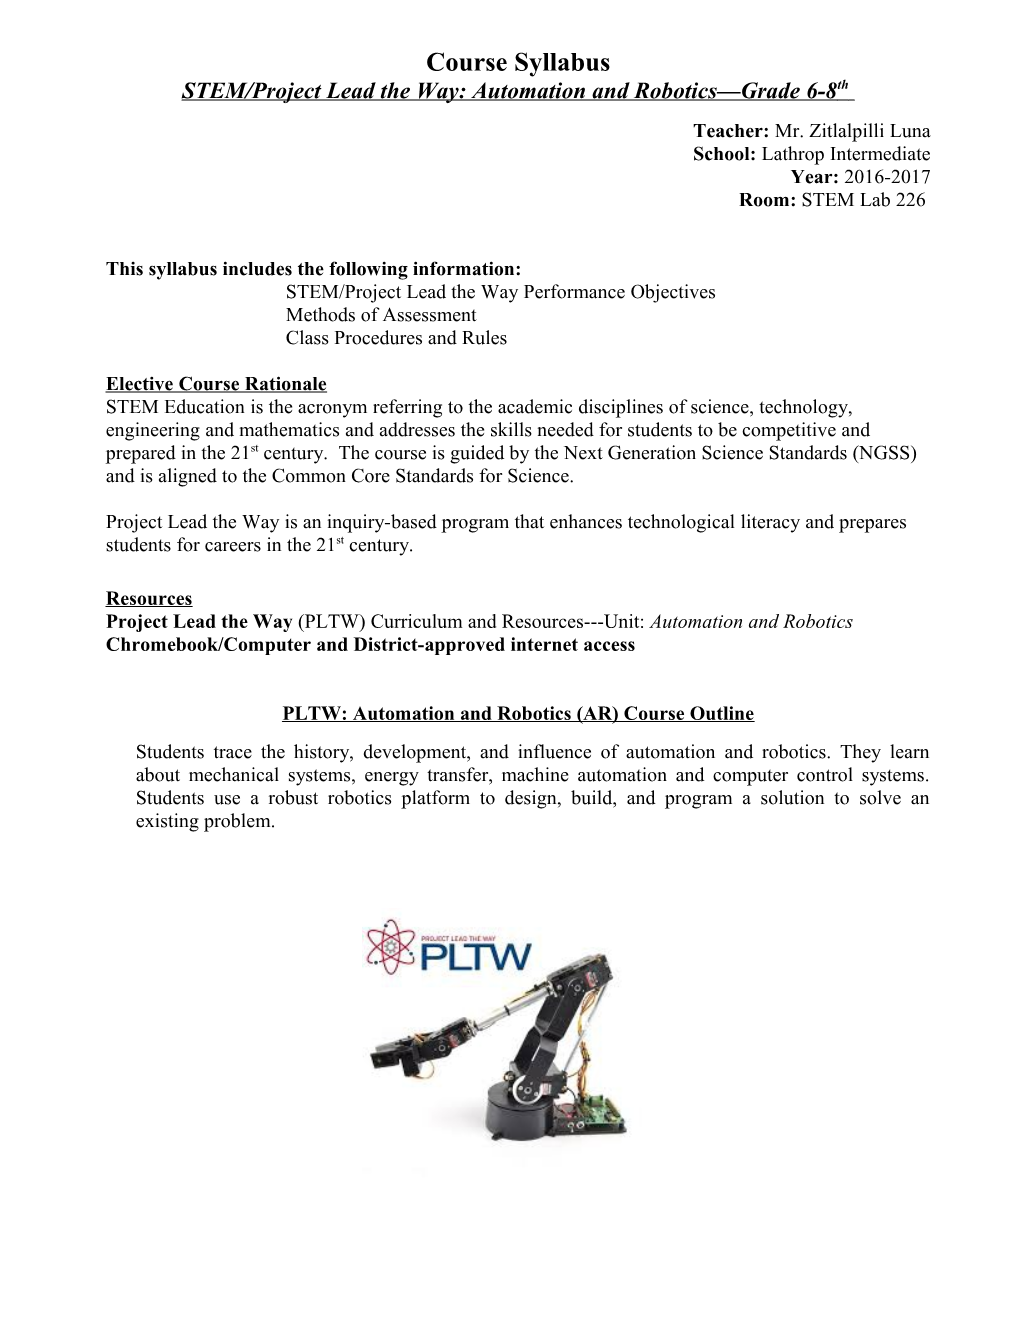 STEM/Project Lead the Way: Automation and Robotics Grade 6-8Th